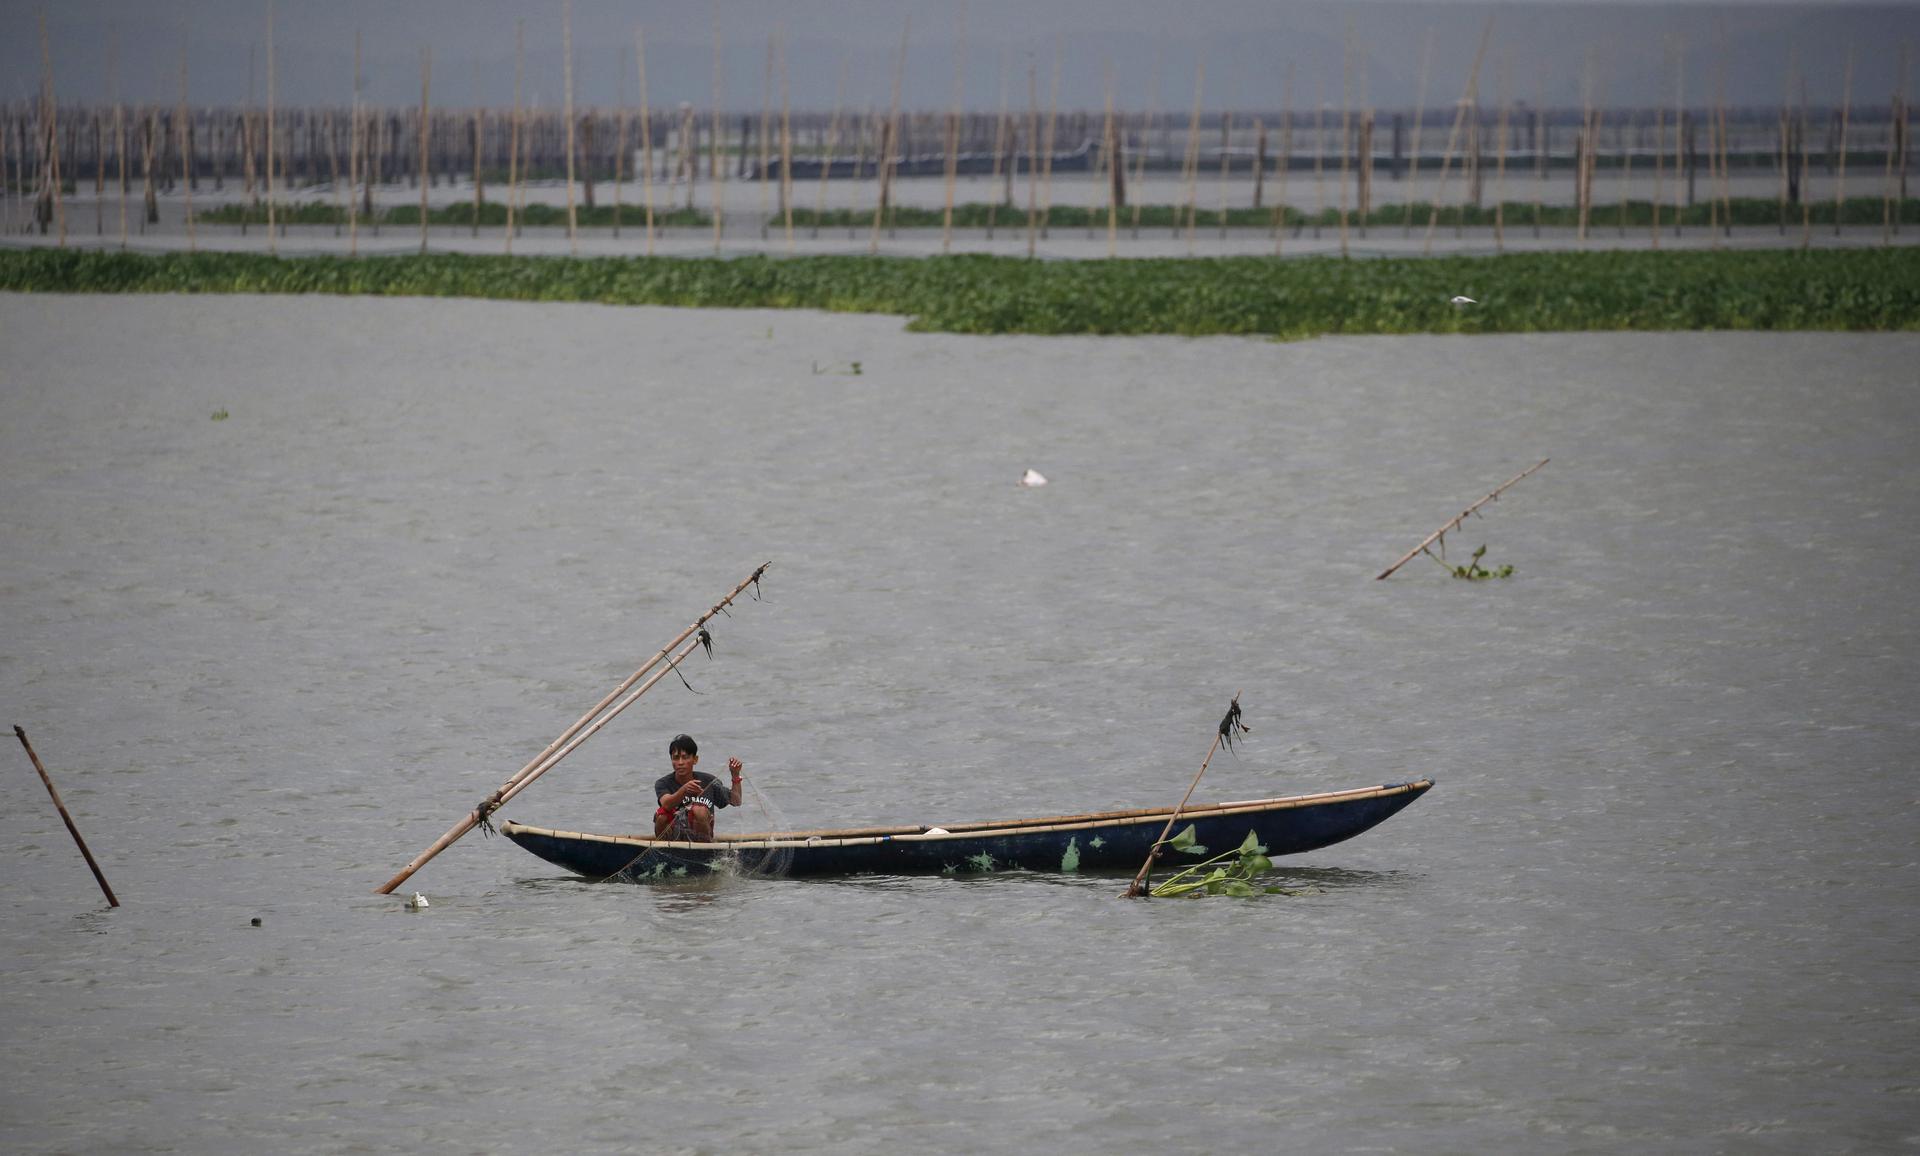 A resident fishes in the waters near Manila, Philippines, amid heavy current and winds brought by Typhoon Melor in some parts of the country. Wide areas of the central Philippines were plunged into darkness on Tuesday as Melor barreled into the coconut-gr